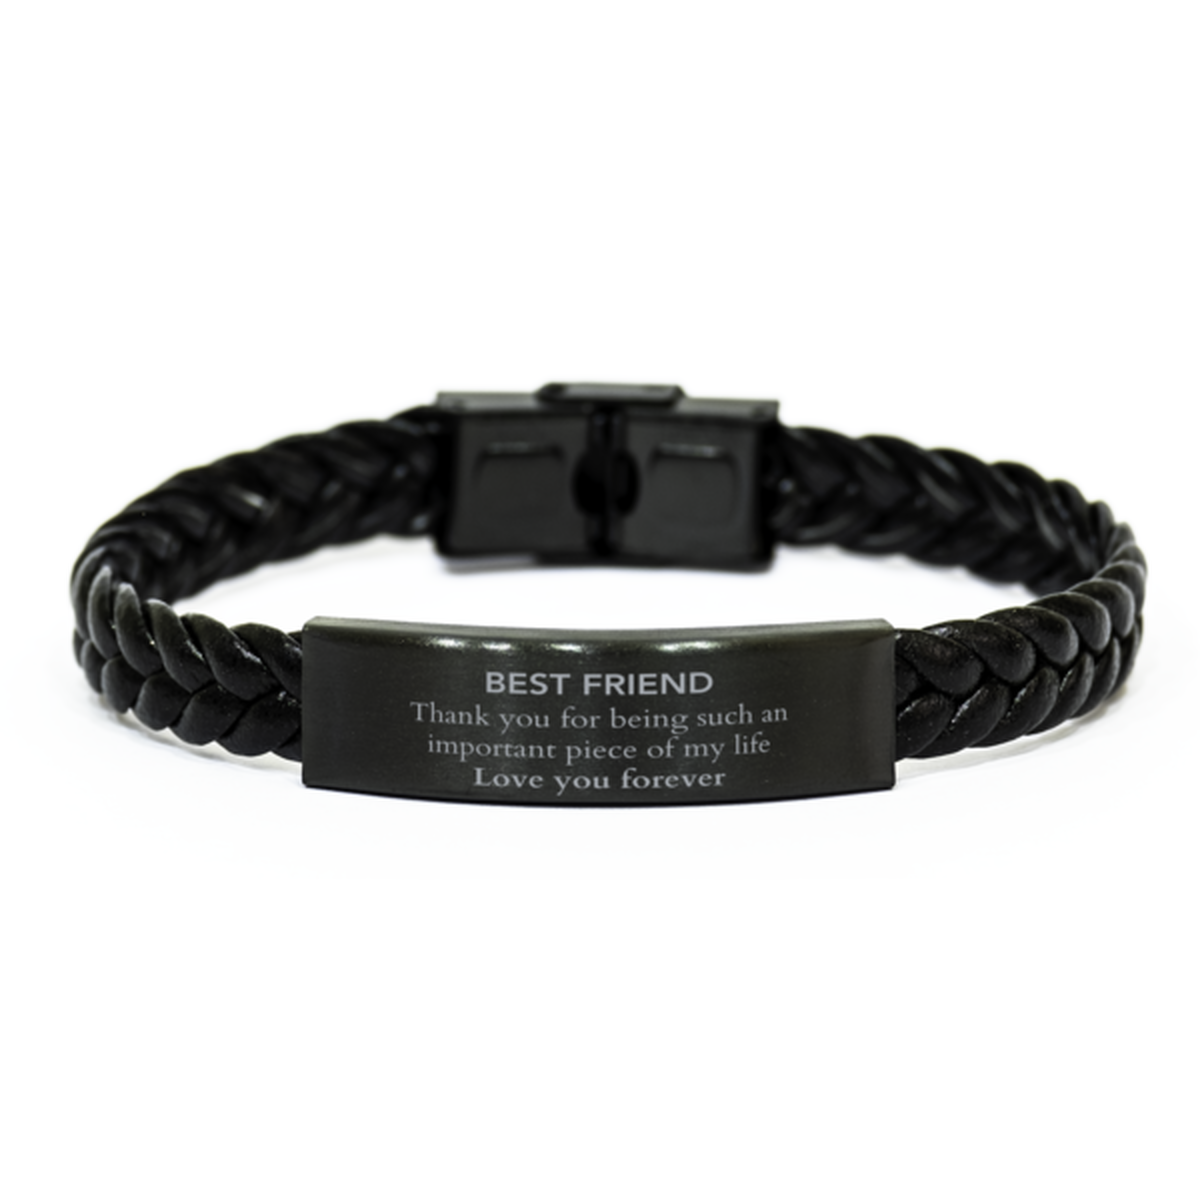 Appropriate Best Friend Braided Leather Bracelet Epic Birthday Gifts for Best Friend Thank you for being such an important piece of my life Best Friend Christmas Mothers Fathers Day